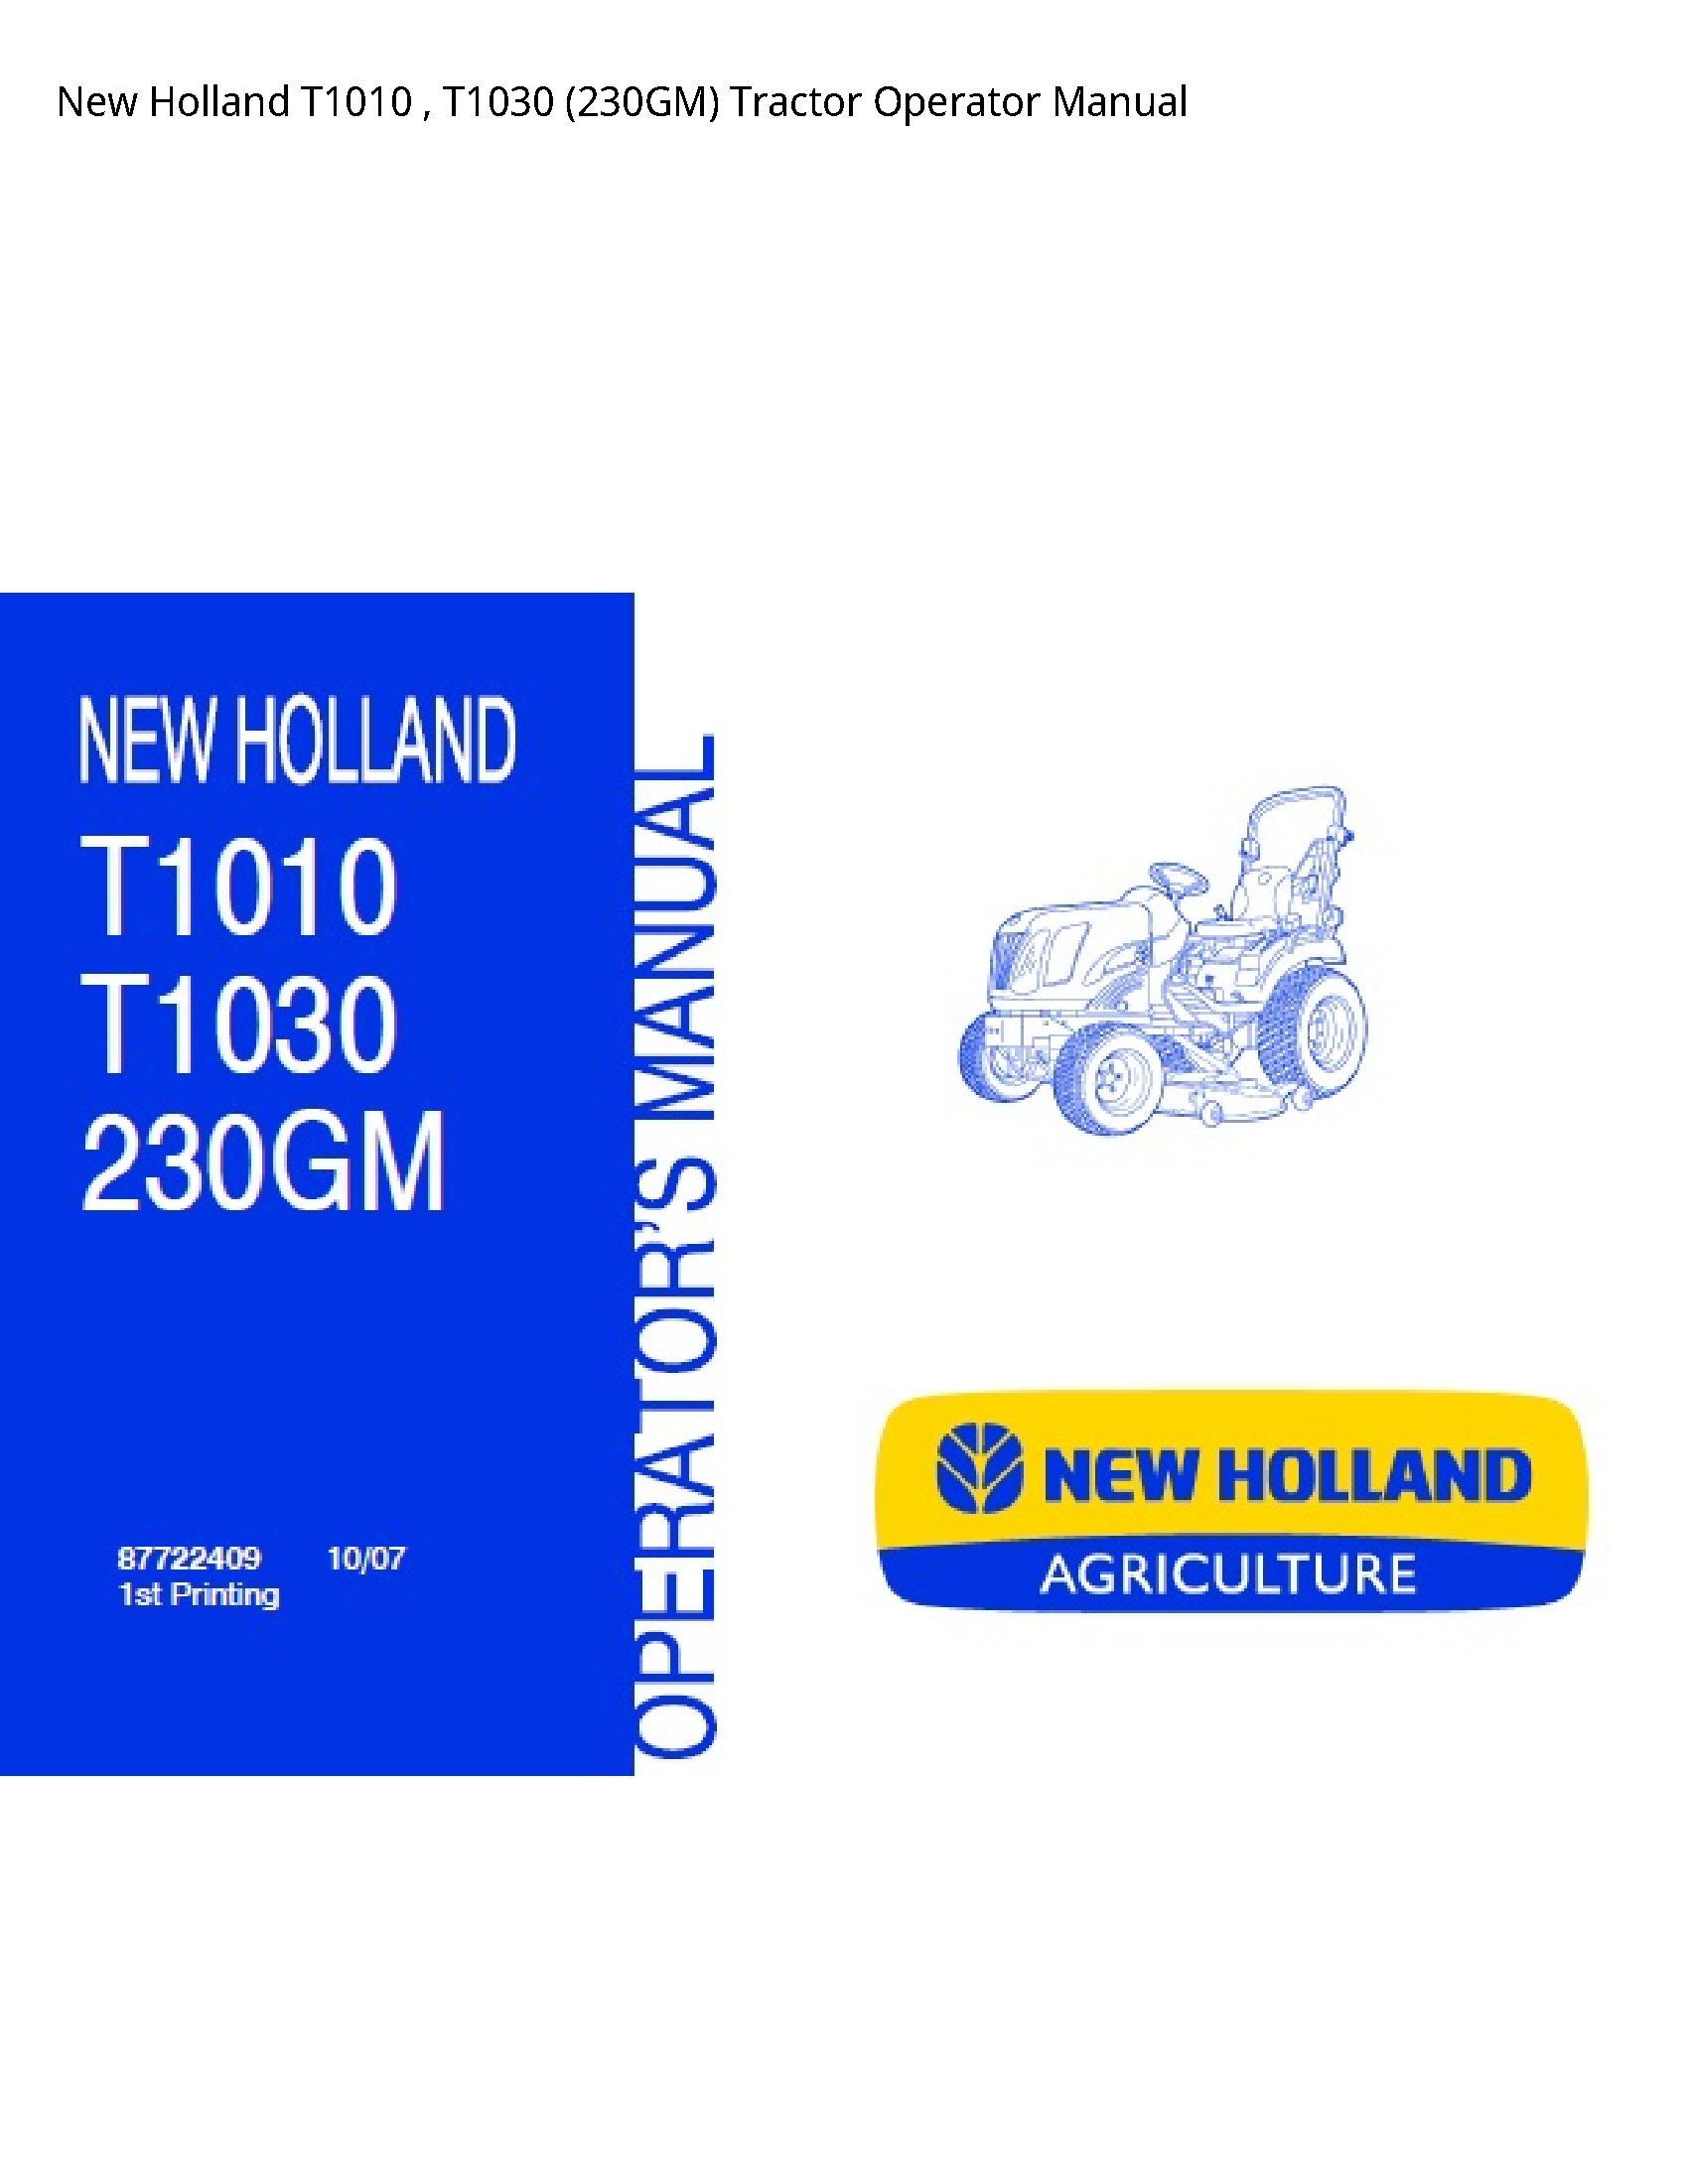 New Holland T1010 Tractor Operator manual